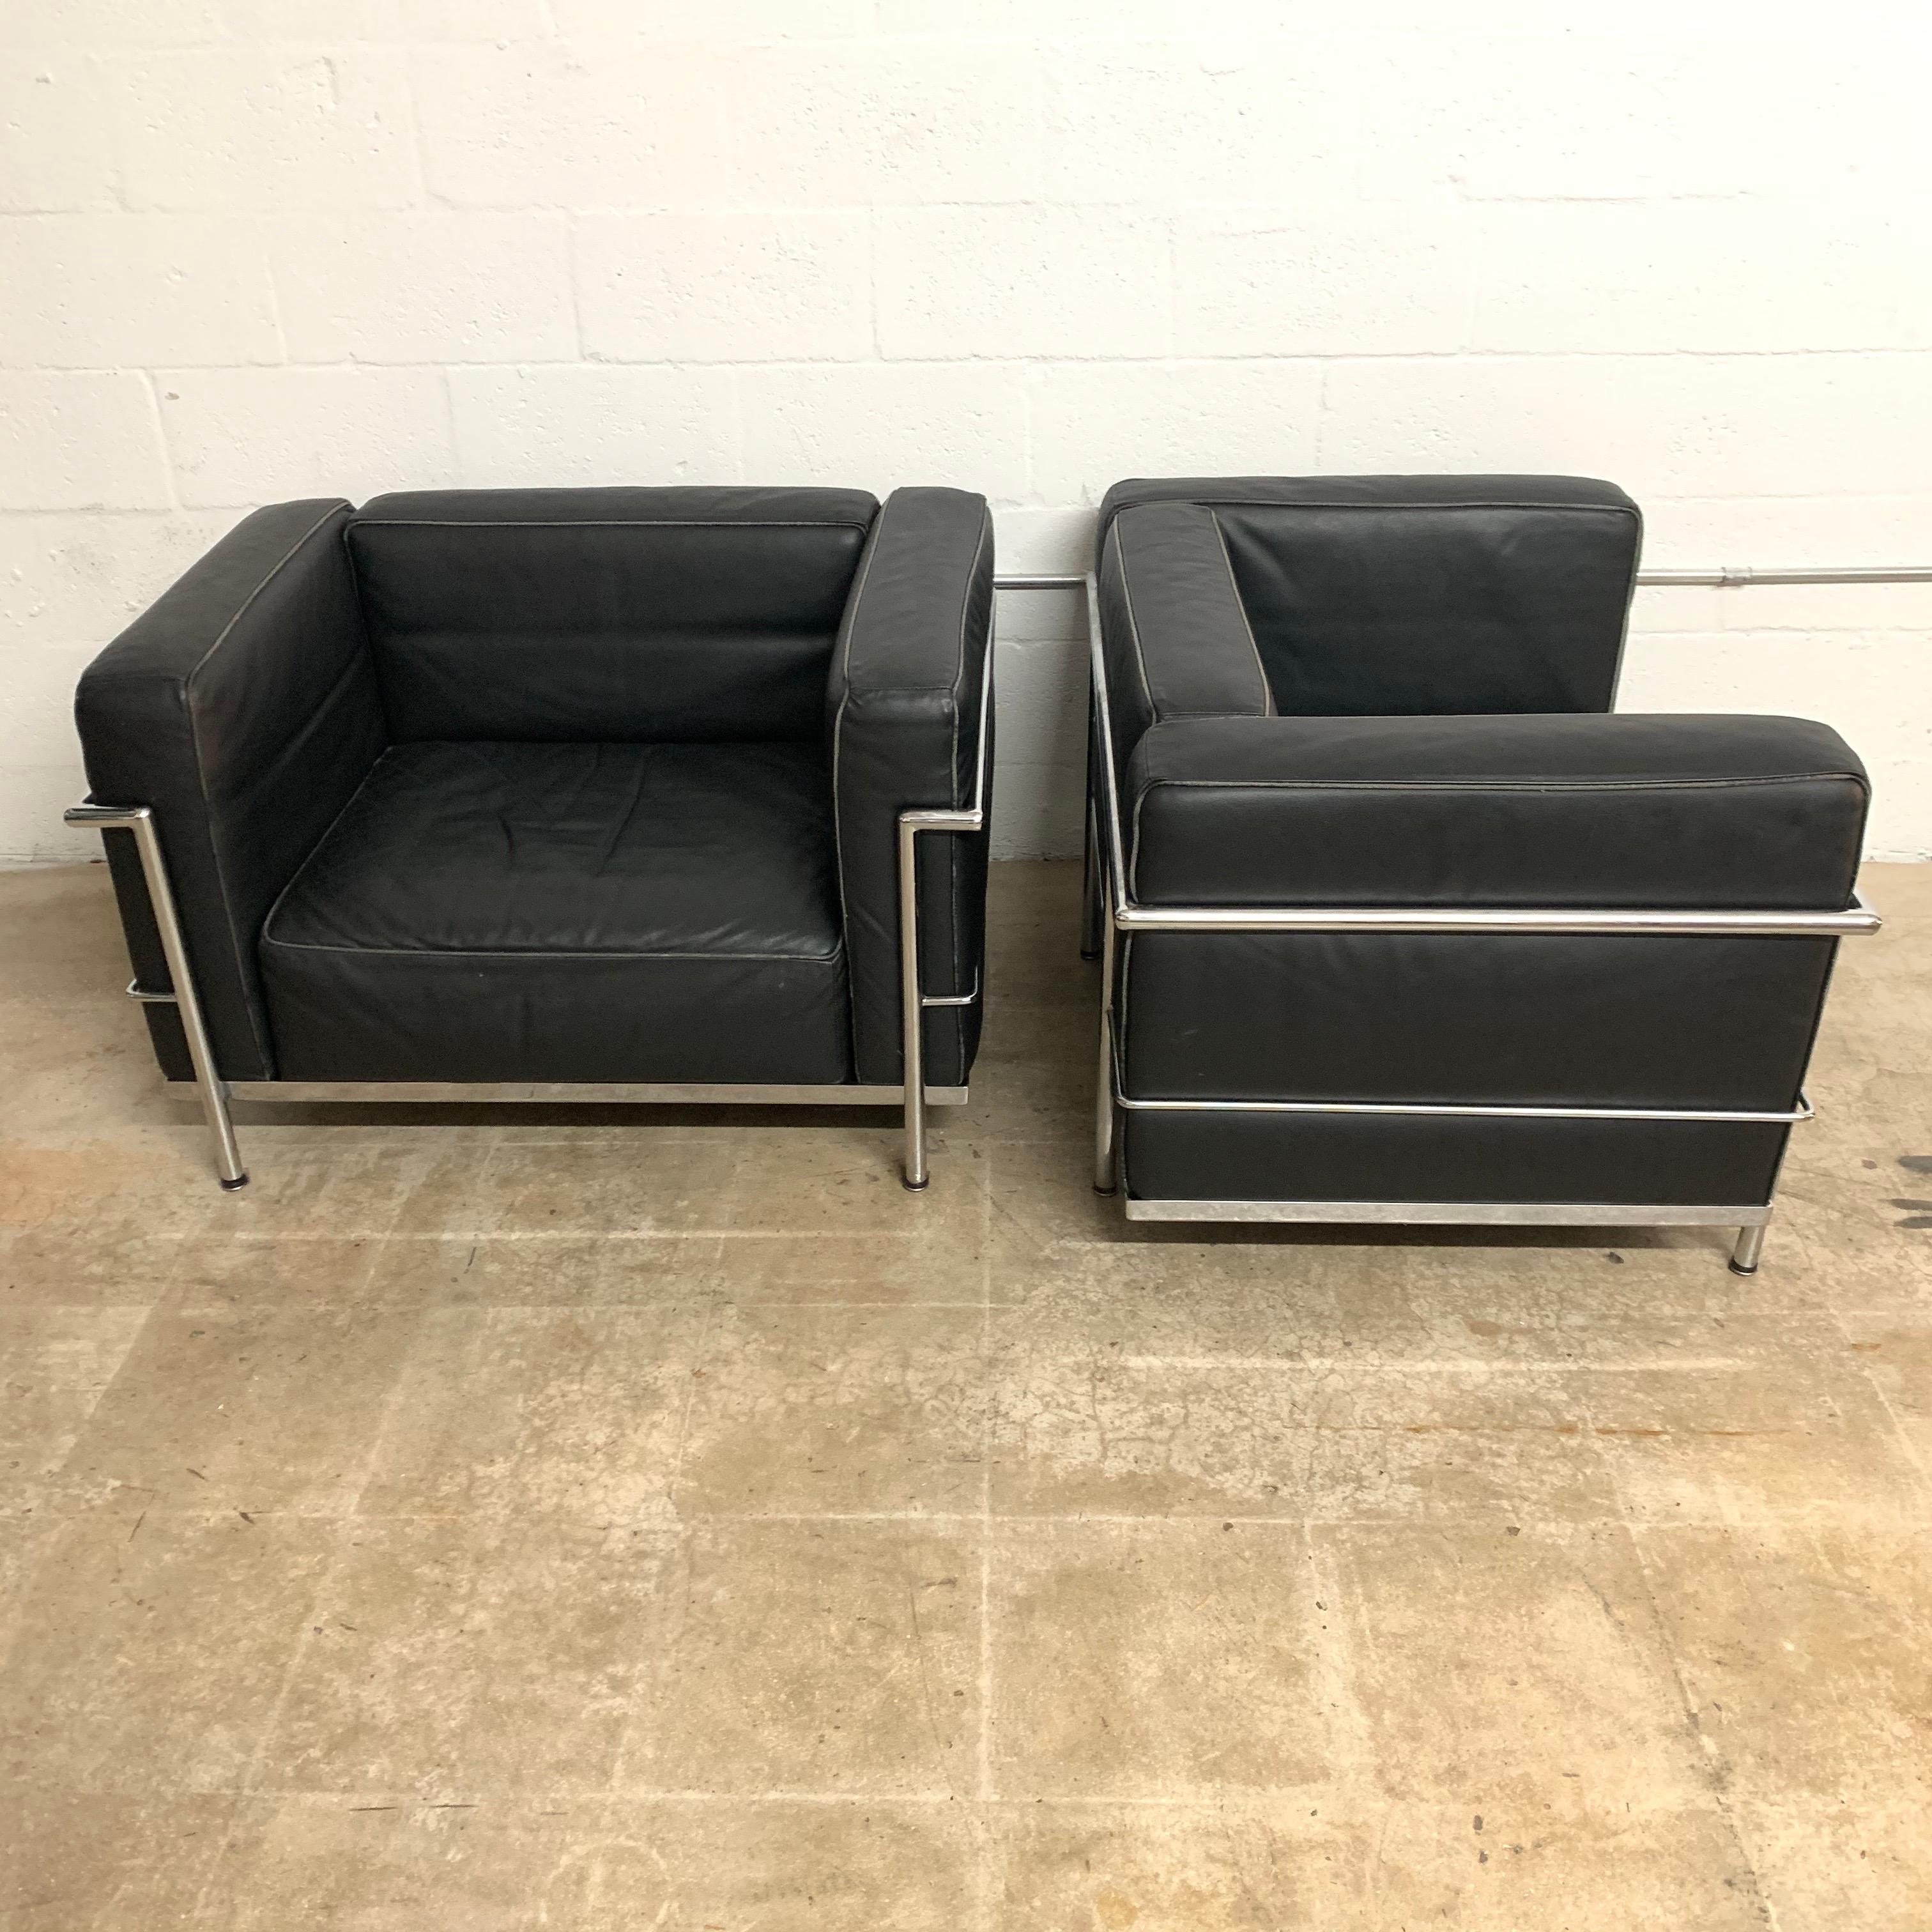 Set of two iconic chairs rendered in black and chrome-plated steel frame by Le Corbusier.